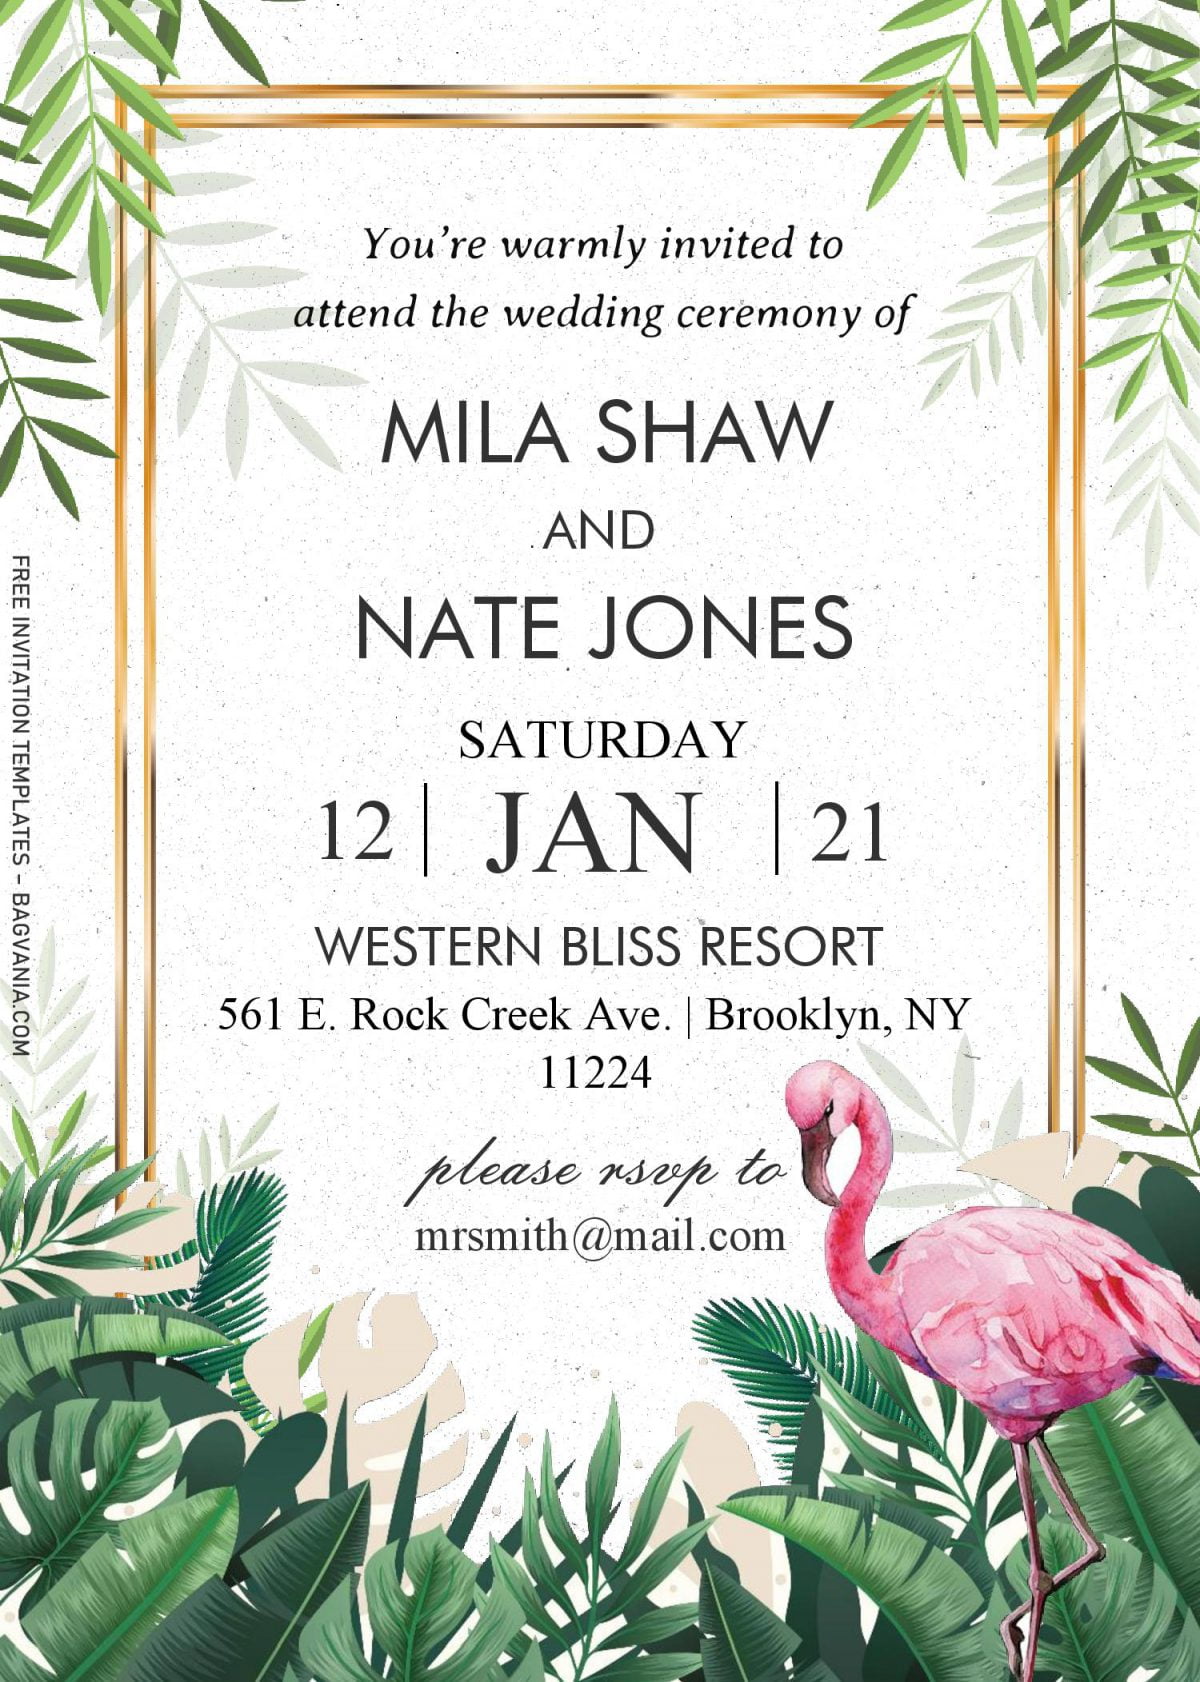 Tropical Leaves Invitation Templates - Editable With MS Word and has portrait orientation